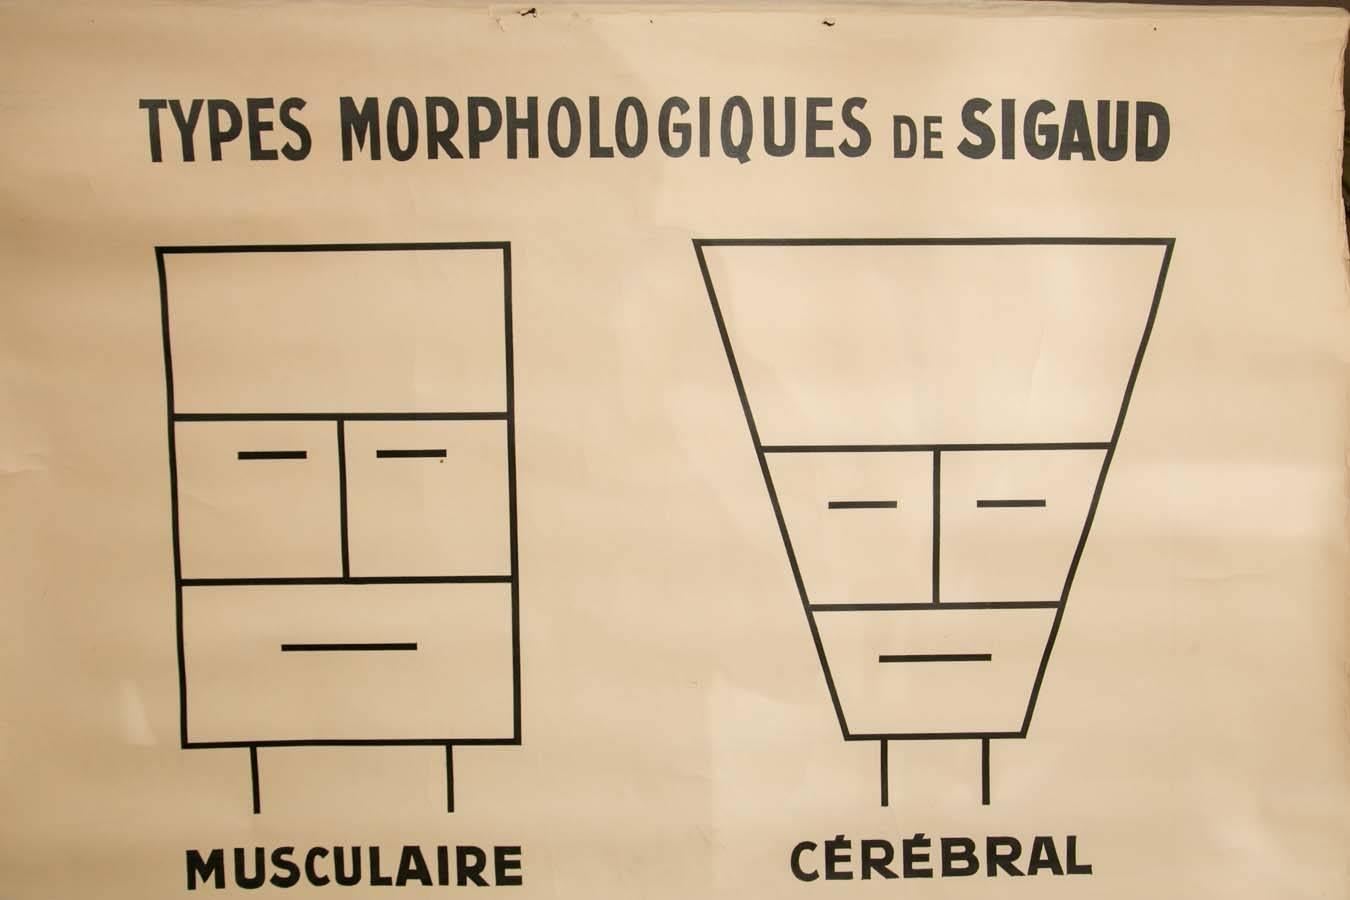 Large Early 20th Century French Morphopsychology Chart 4